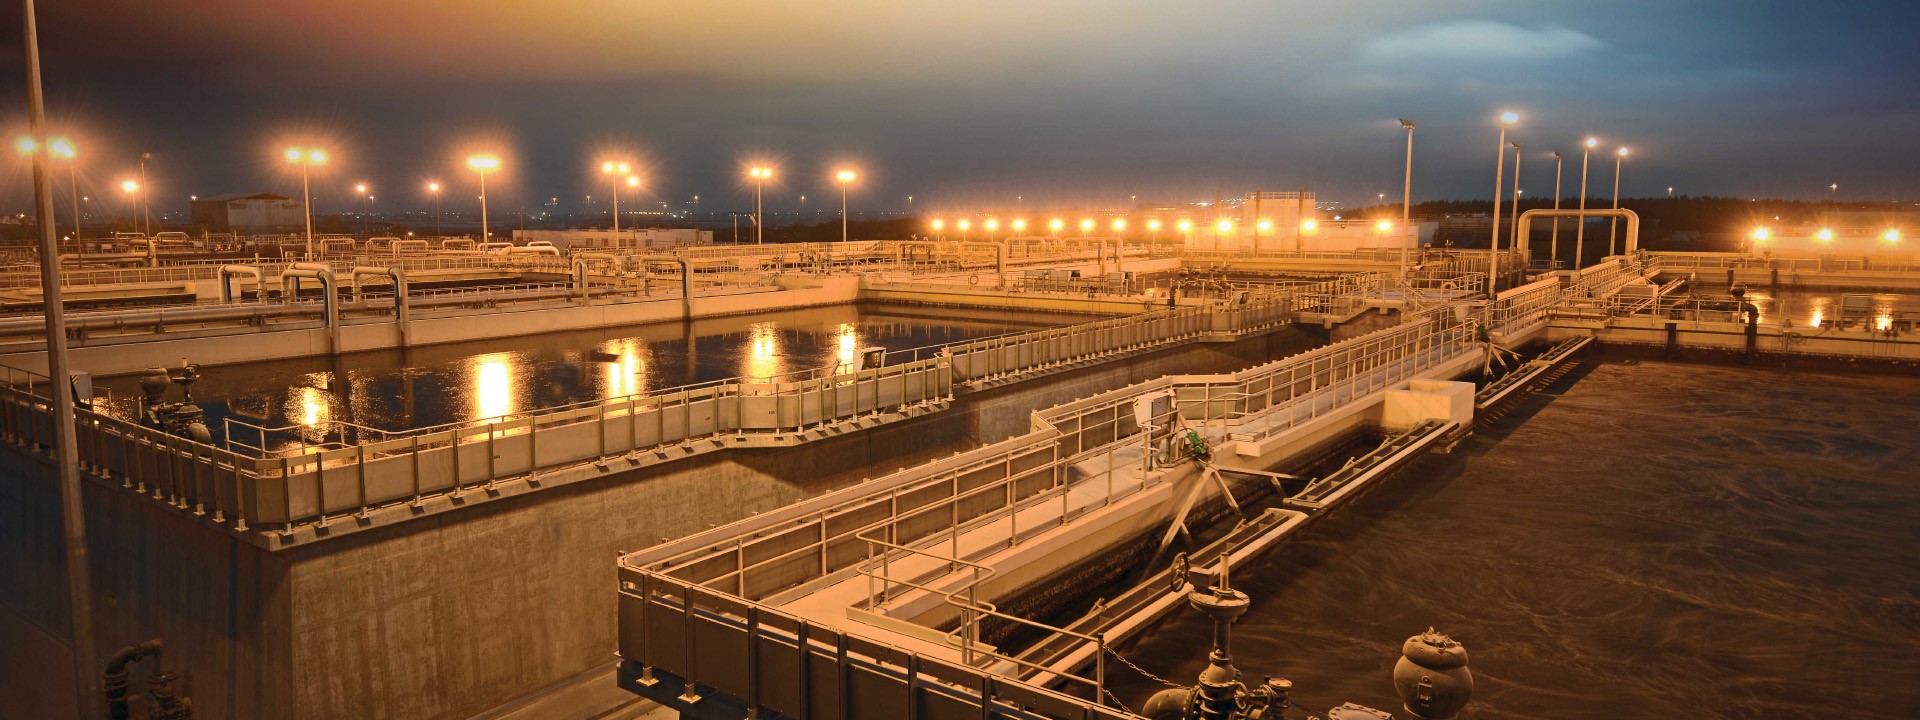 Wastewater Networks & Treatment Plants -L&T Construction